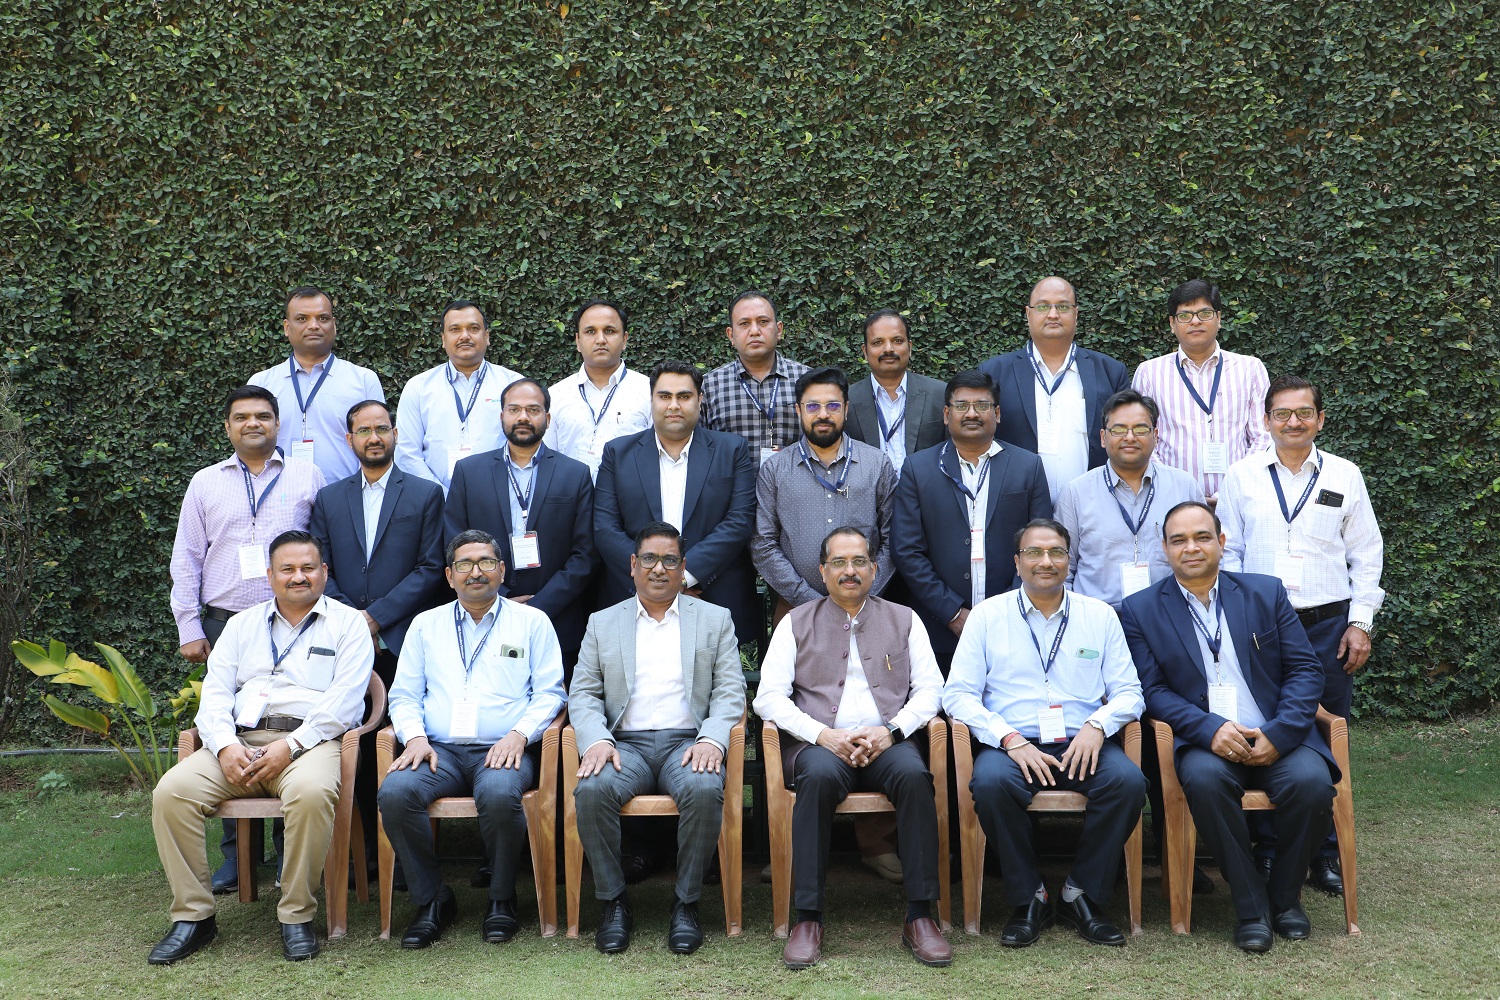 Participants of the Management Development Programme for Sales Leadership of Mahindra Swaraj, Government of Karnataka, on 20th February 2023.